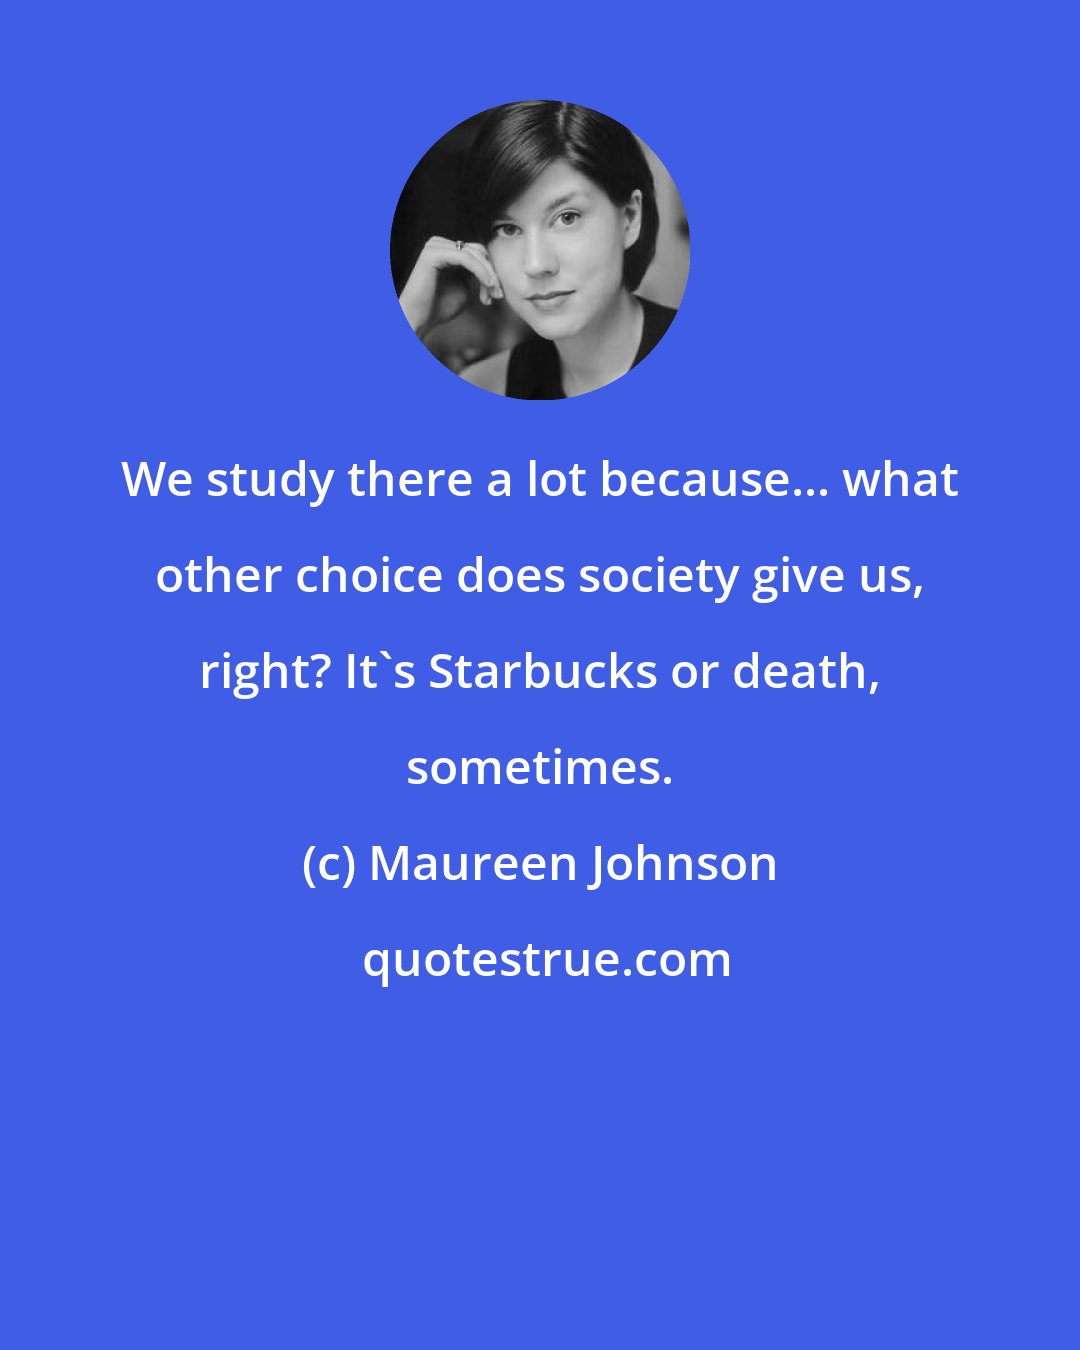 Maureen Johnson: We study there a lot because... what other choice does society give us, right? It's Starbucks or death, sometimes.